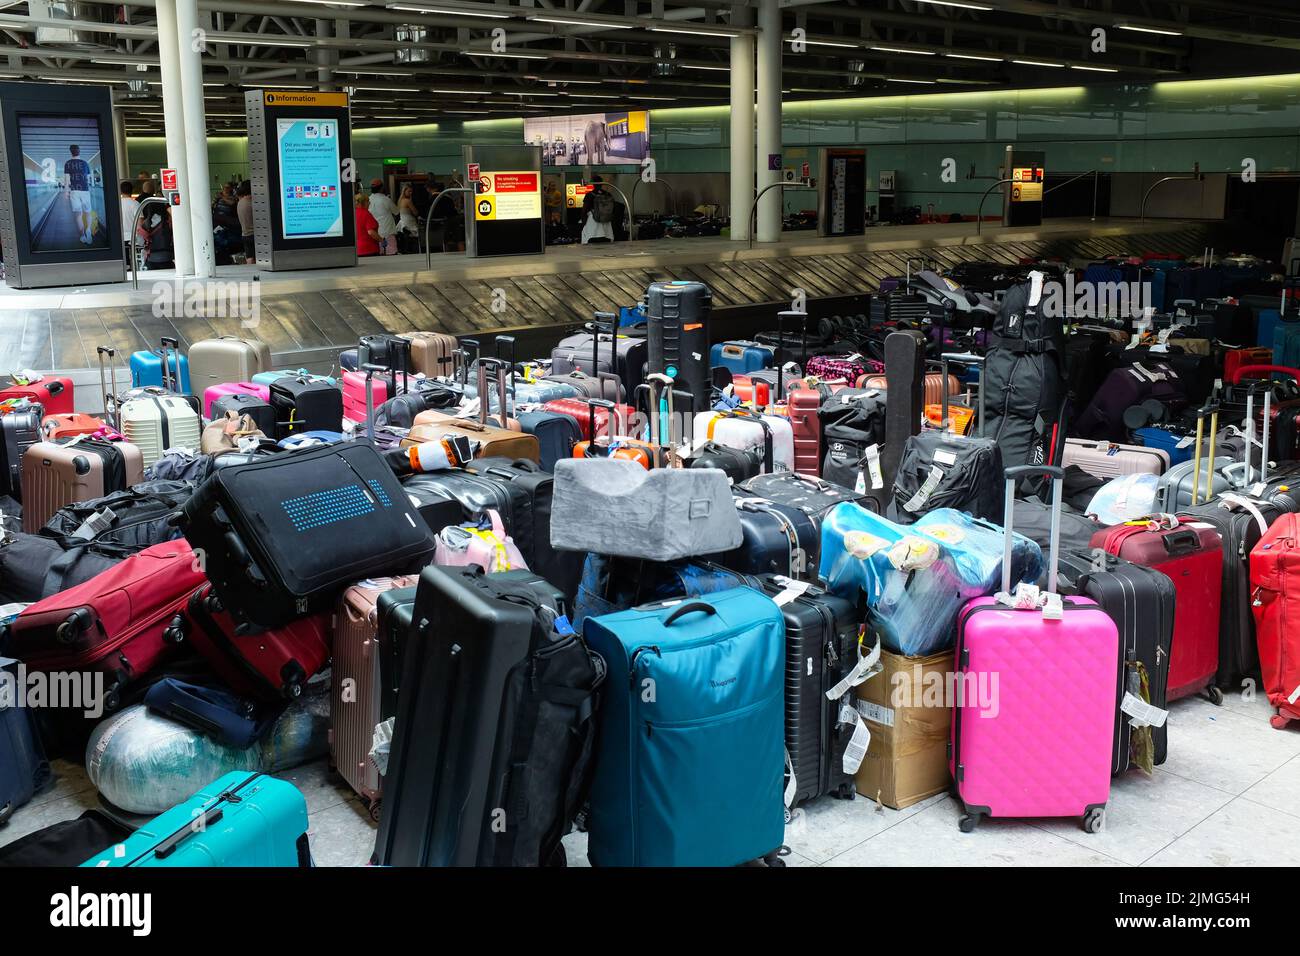 Some of the so-called 'baggage mountain' that greeted arriving travellers at London's Heathrow Airport in July 2022. Stock Photo